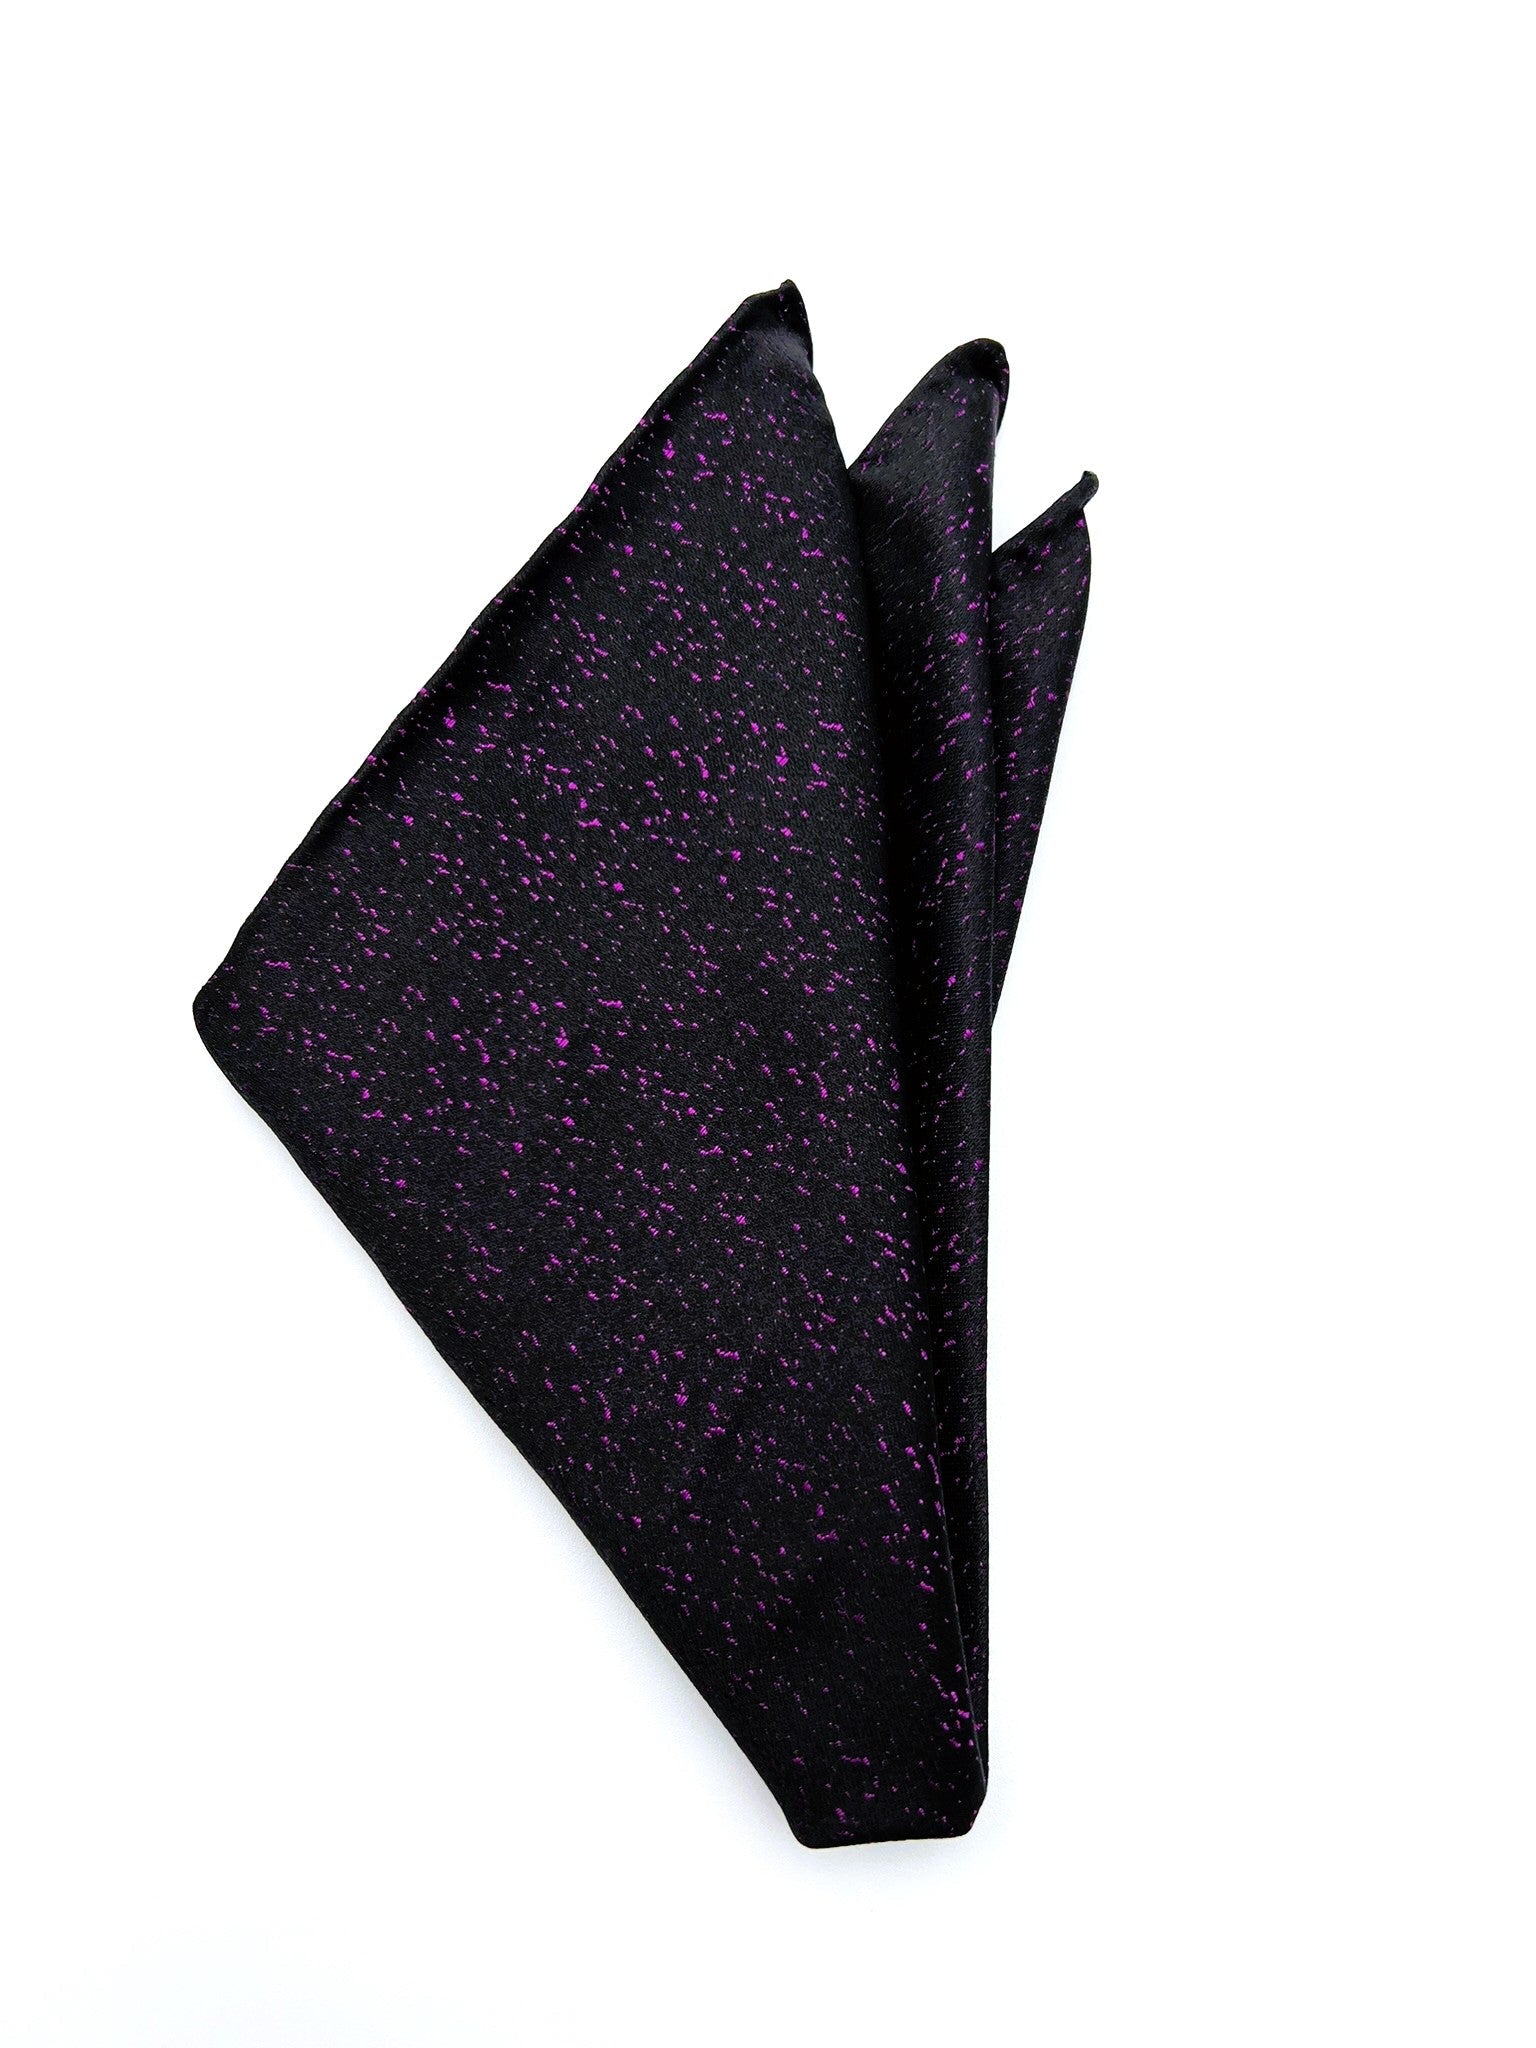 Navy Blue Pink Asymmetric Silk Pocket Square. Handmade in Italy. Pocket Square in 100% pure Italian silk,  hand-finished edges. A must-have accessory for every  man&#39;s wardrobe that can suit either  a classic or sophisticated look.| Sartoria Dei Duchi - Atri